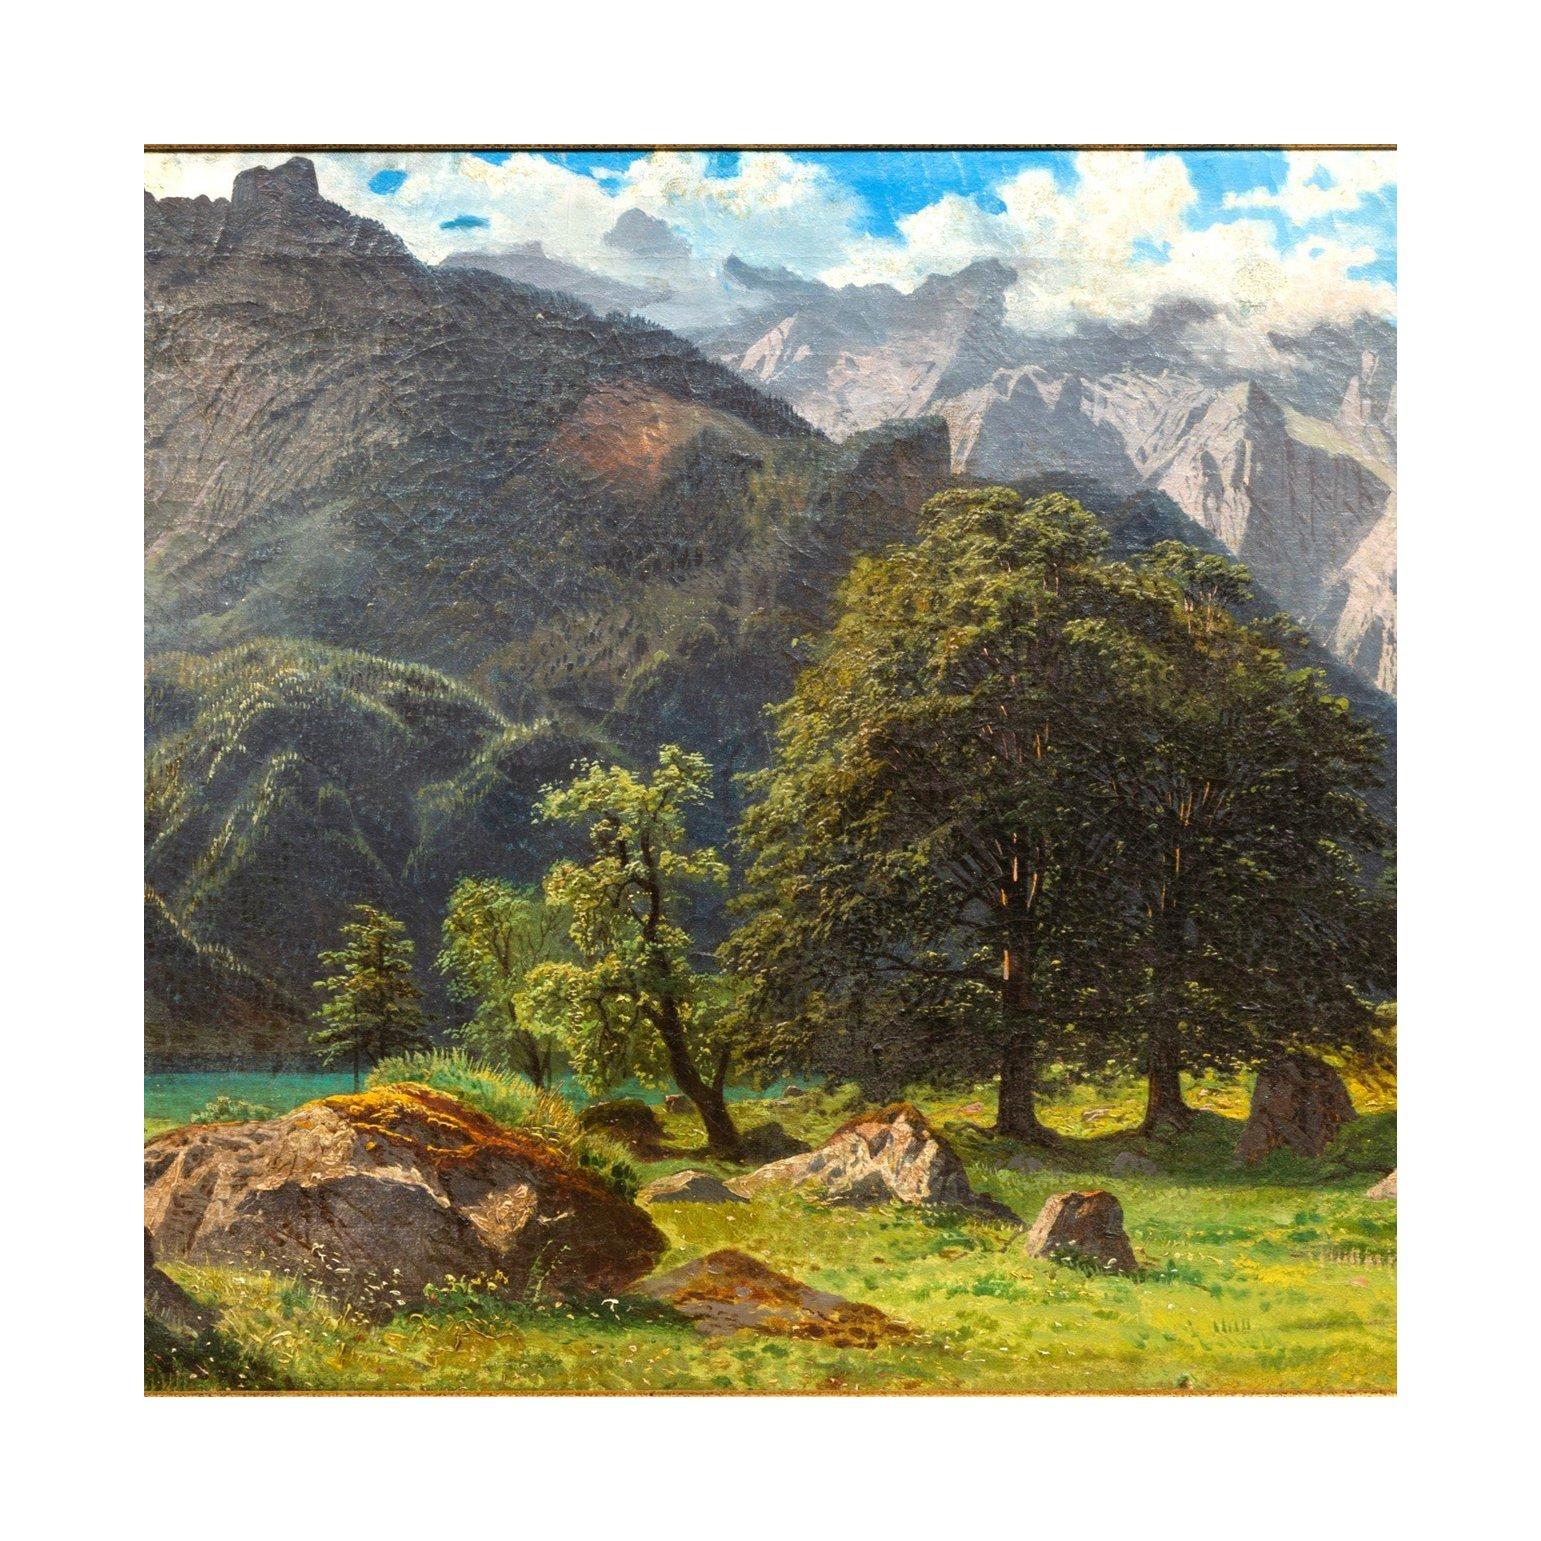 The Watsman, a painted view between Obersee and Koningsee, Upper Bavaria. Study painted in 1856 by François Roffiaen.

François Roffiaen (1820-1898): Biography

François Roffiaen's family on his father's side came from humble beginnings. The men